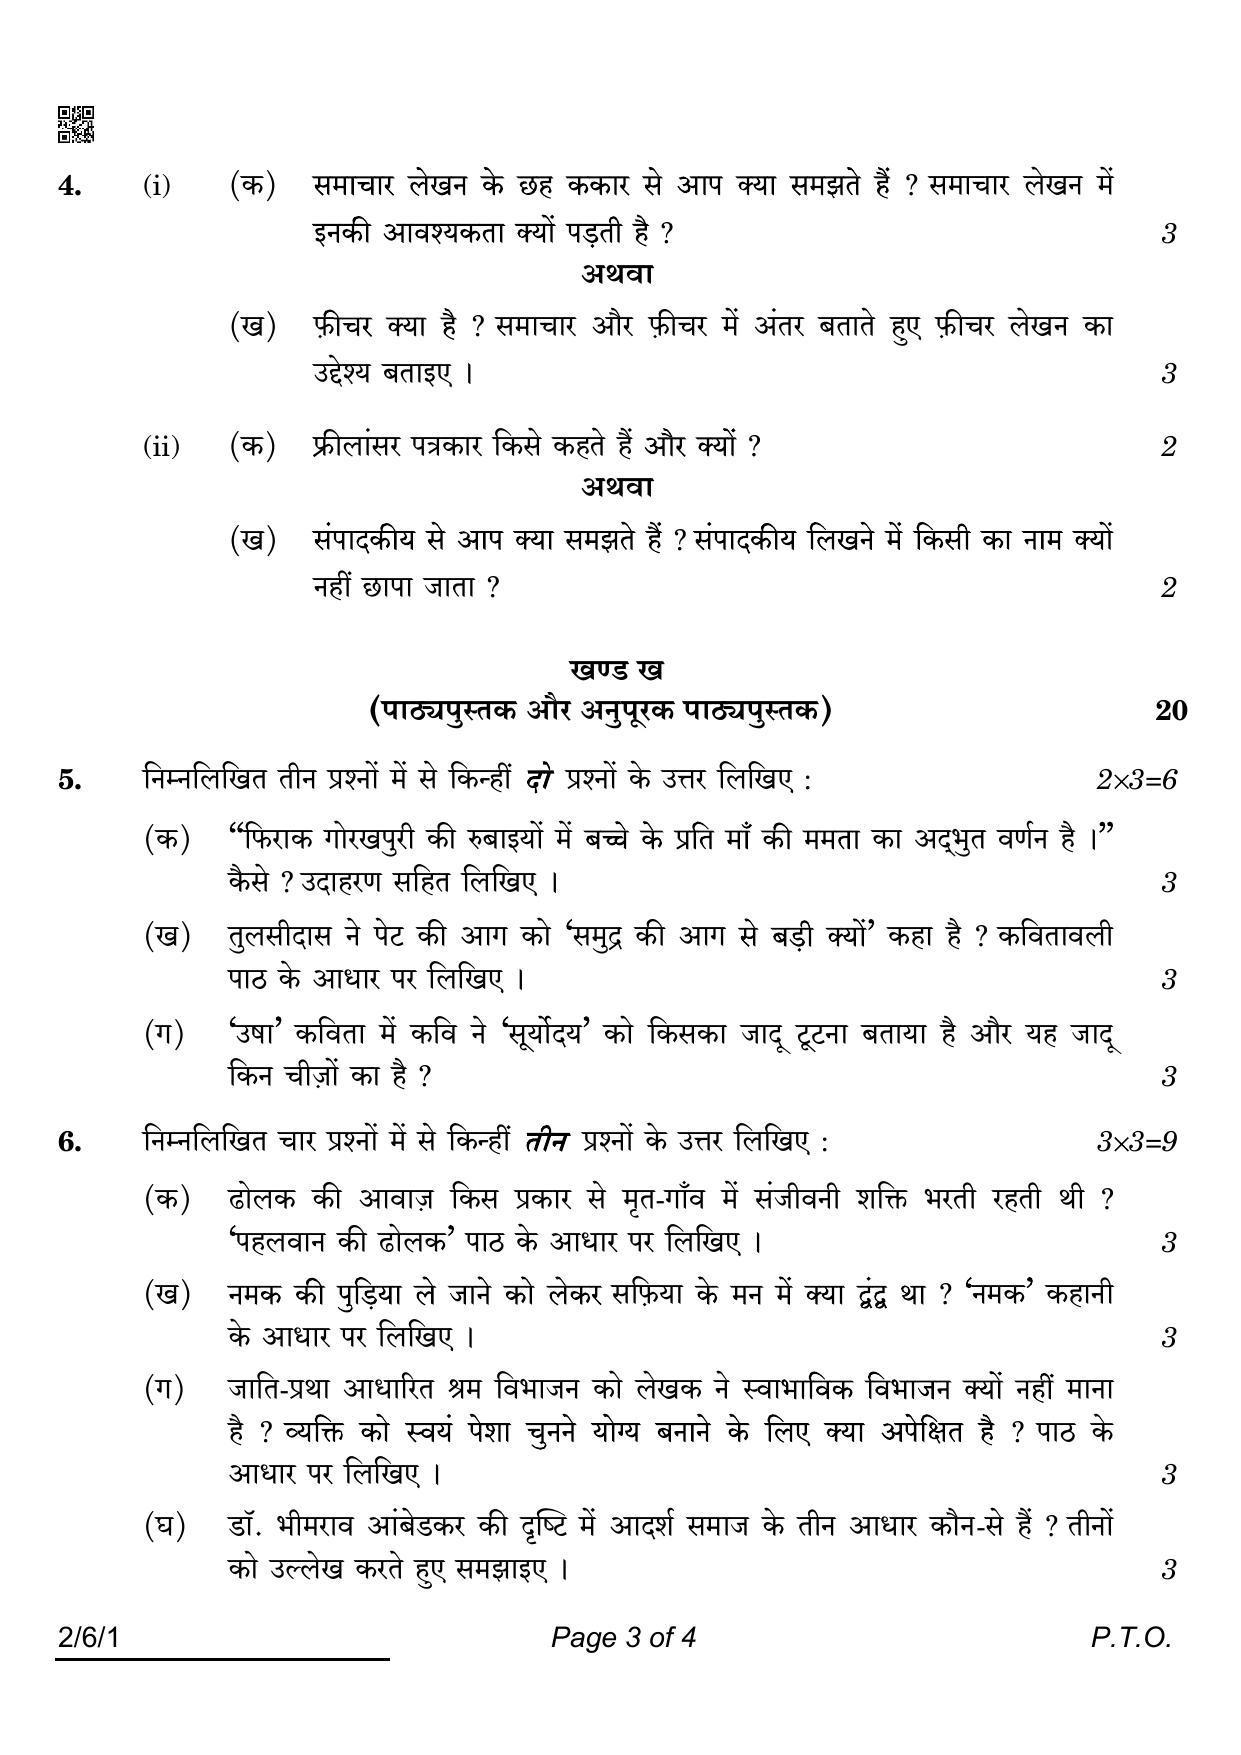 CBSE Class 12 2-6-1 Hindi Core 2022 Compartment Question Paper - Page 3